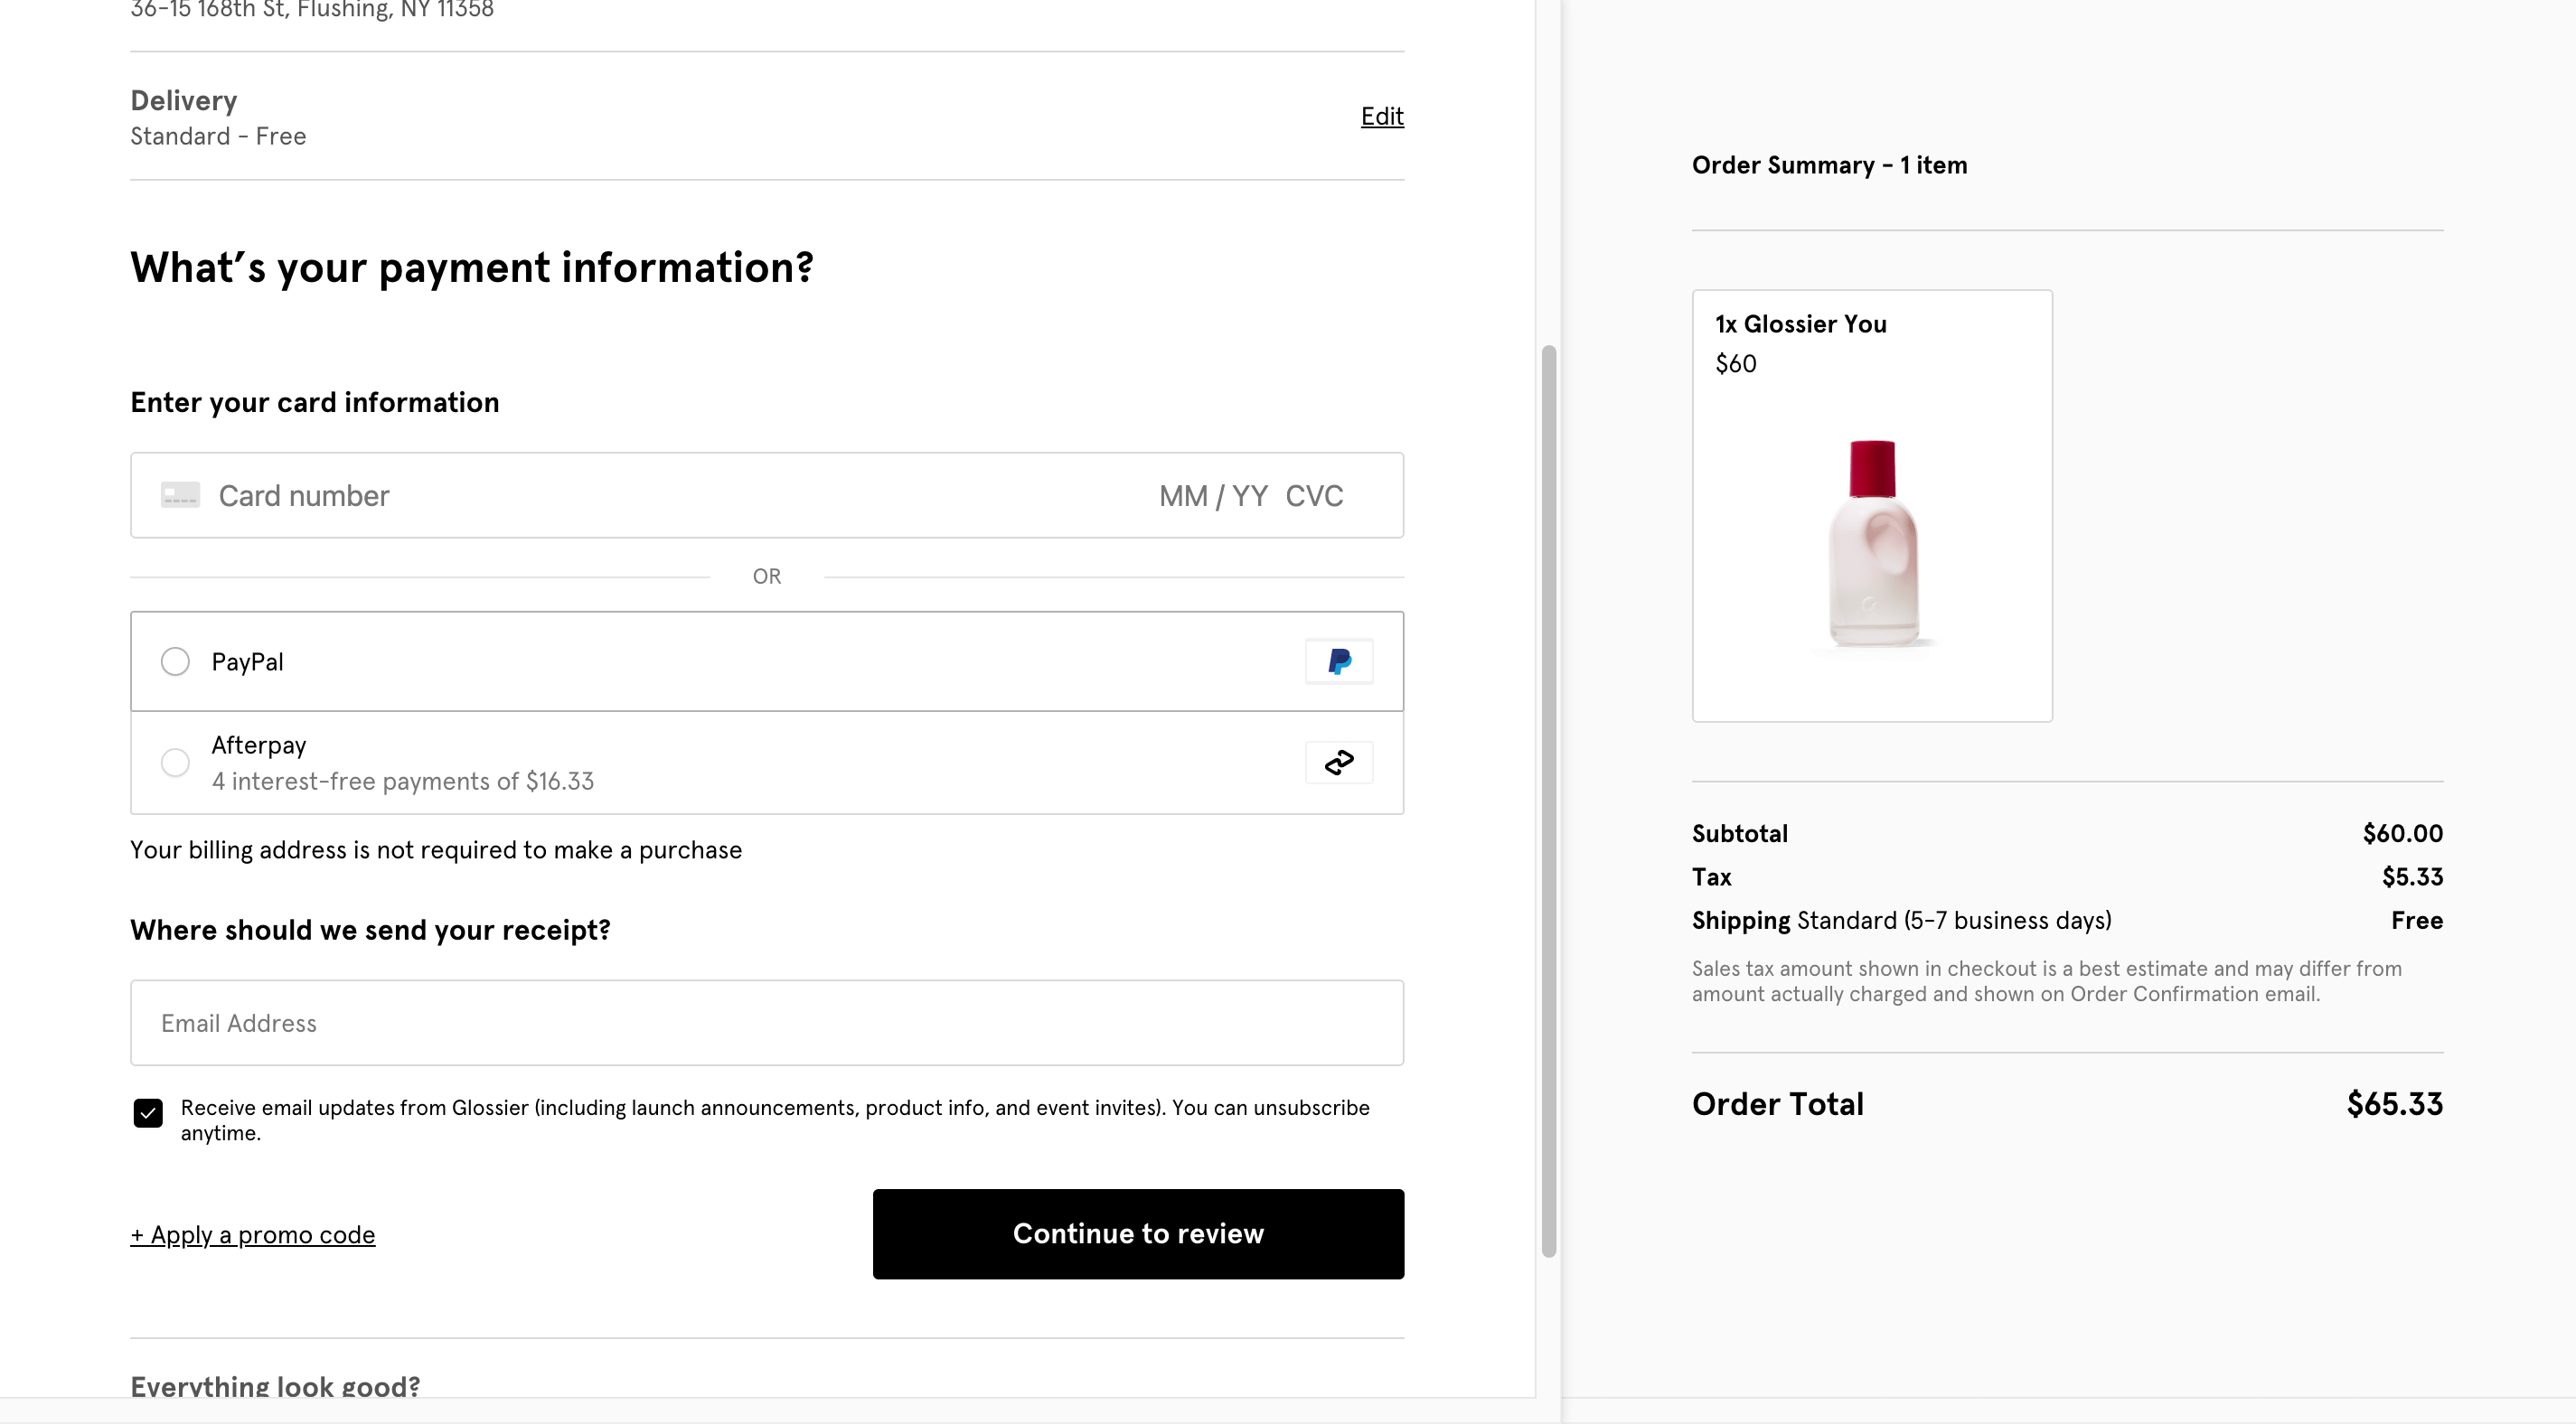 Screenshot of Glossier's Checkout Page